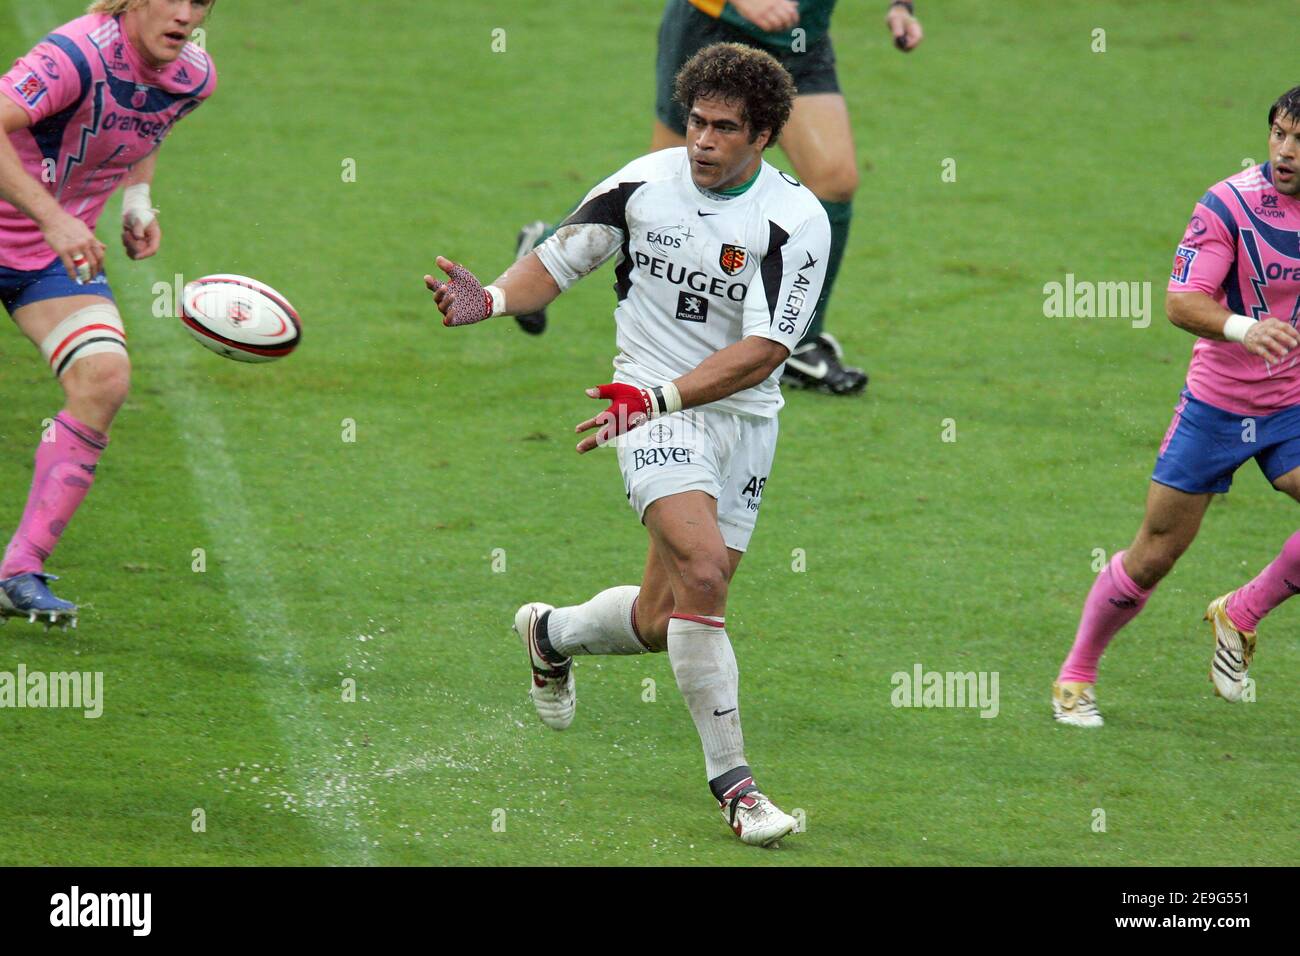 Finau Maka (Stade Toulousain) during the French Top 14 rugby Championship,  Stade Toulousain vs Stade Francais